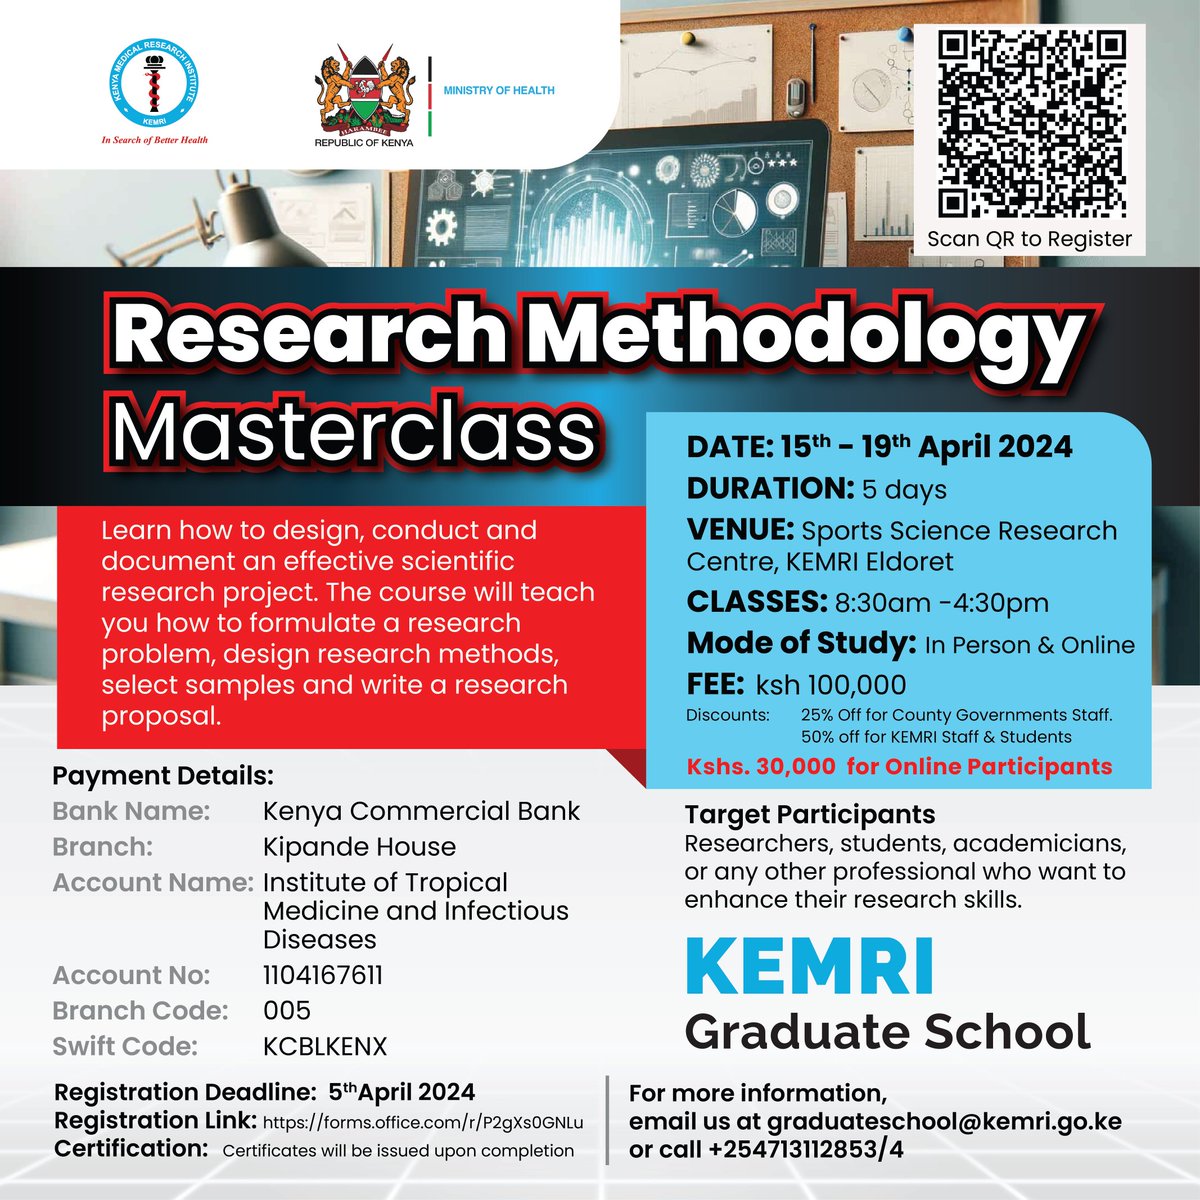 📢Registration deadline for the Research Methodology Masterclass organized by the KEMRI Graduate School is TOMORROW 5|04|24 🔗Register: forms.office.com/pages/response… #Researchmethodology #capacitybuilding